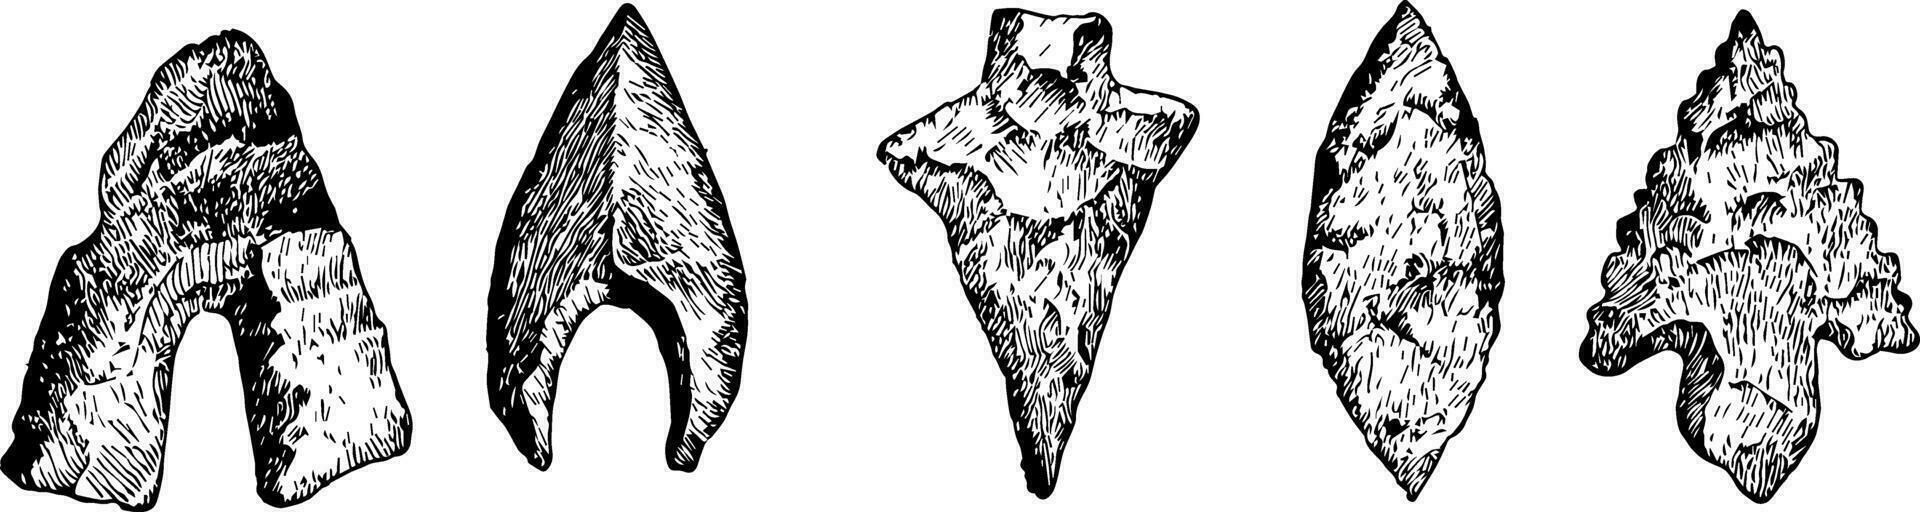 Arrowheads of the Stone Age vintage illustration. vector